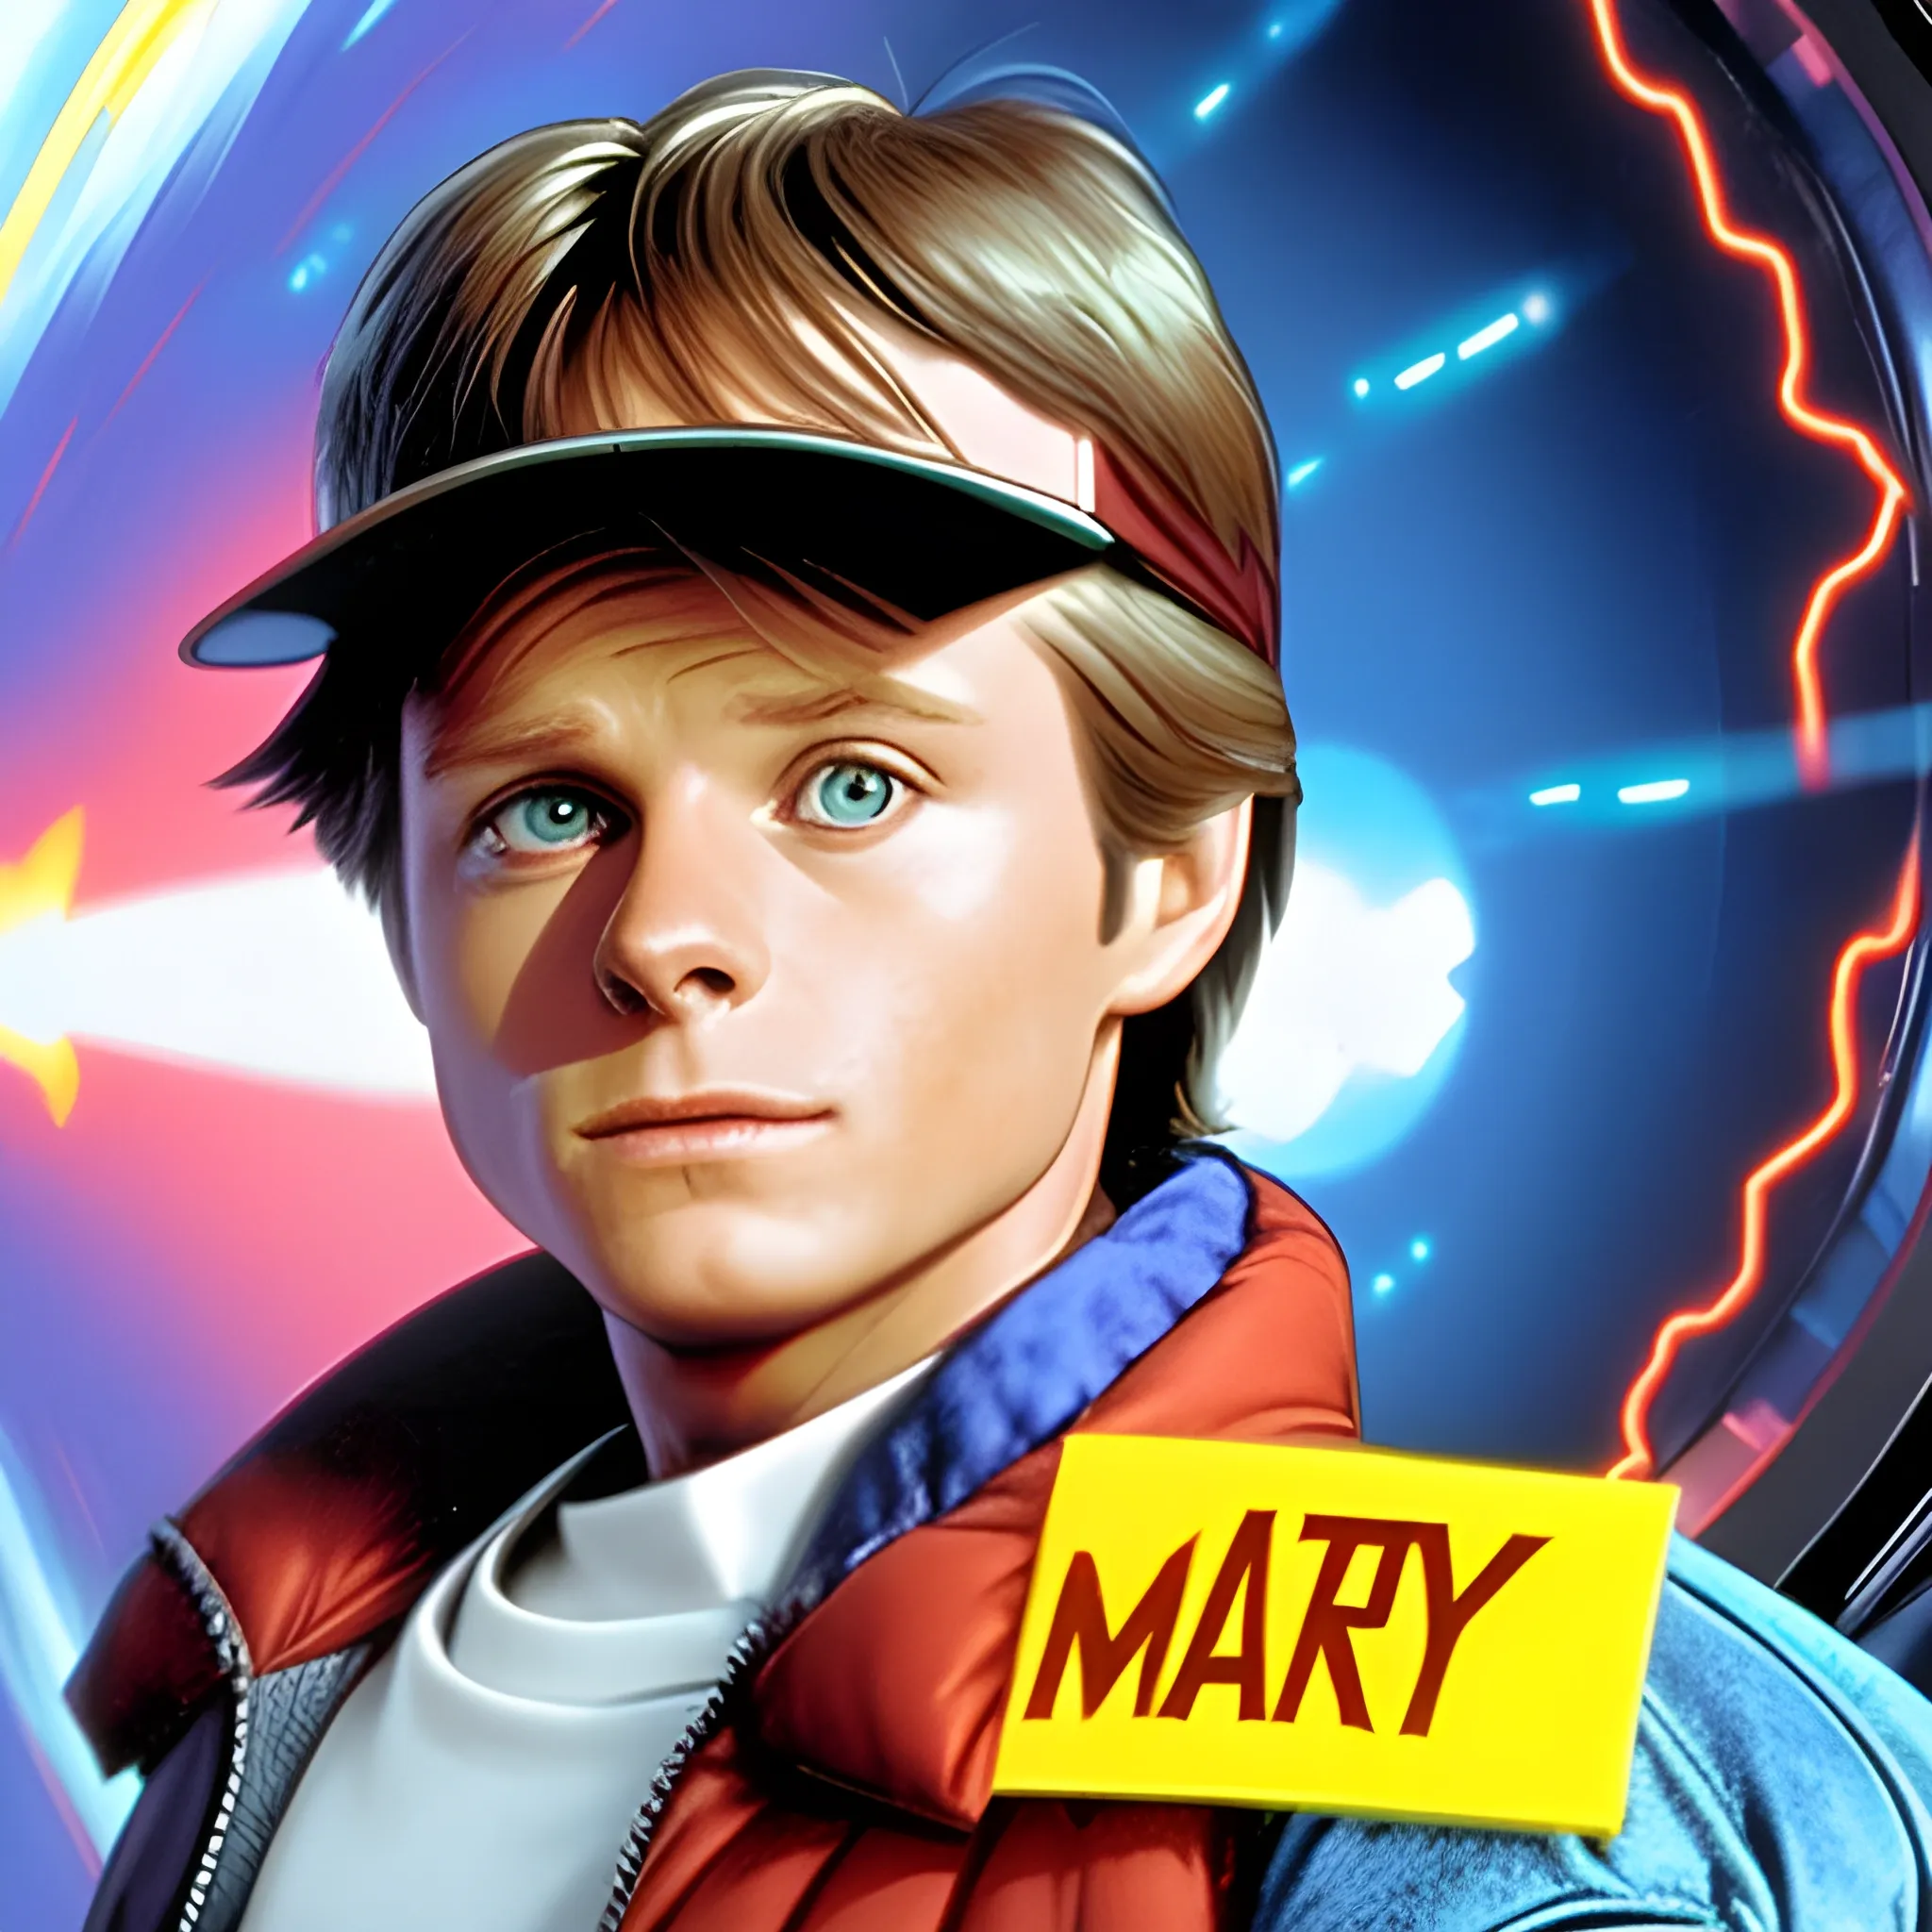 Marty mcfly